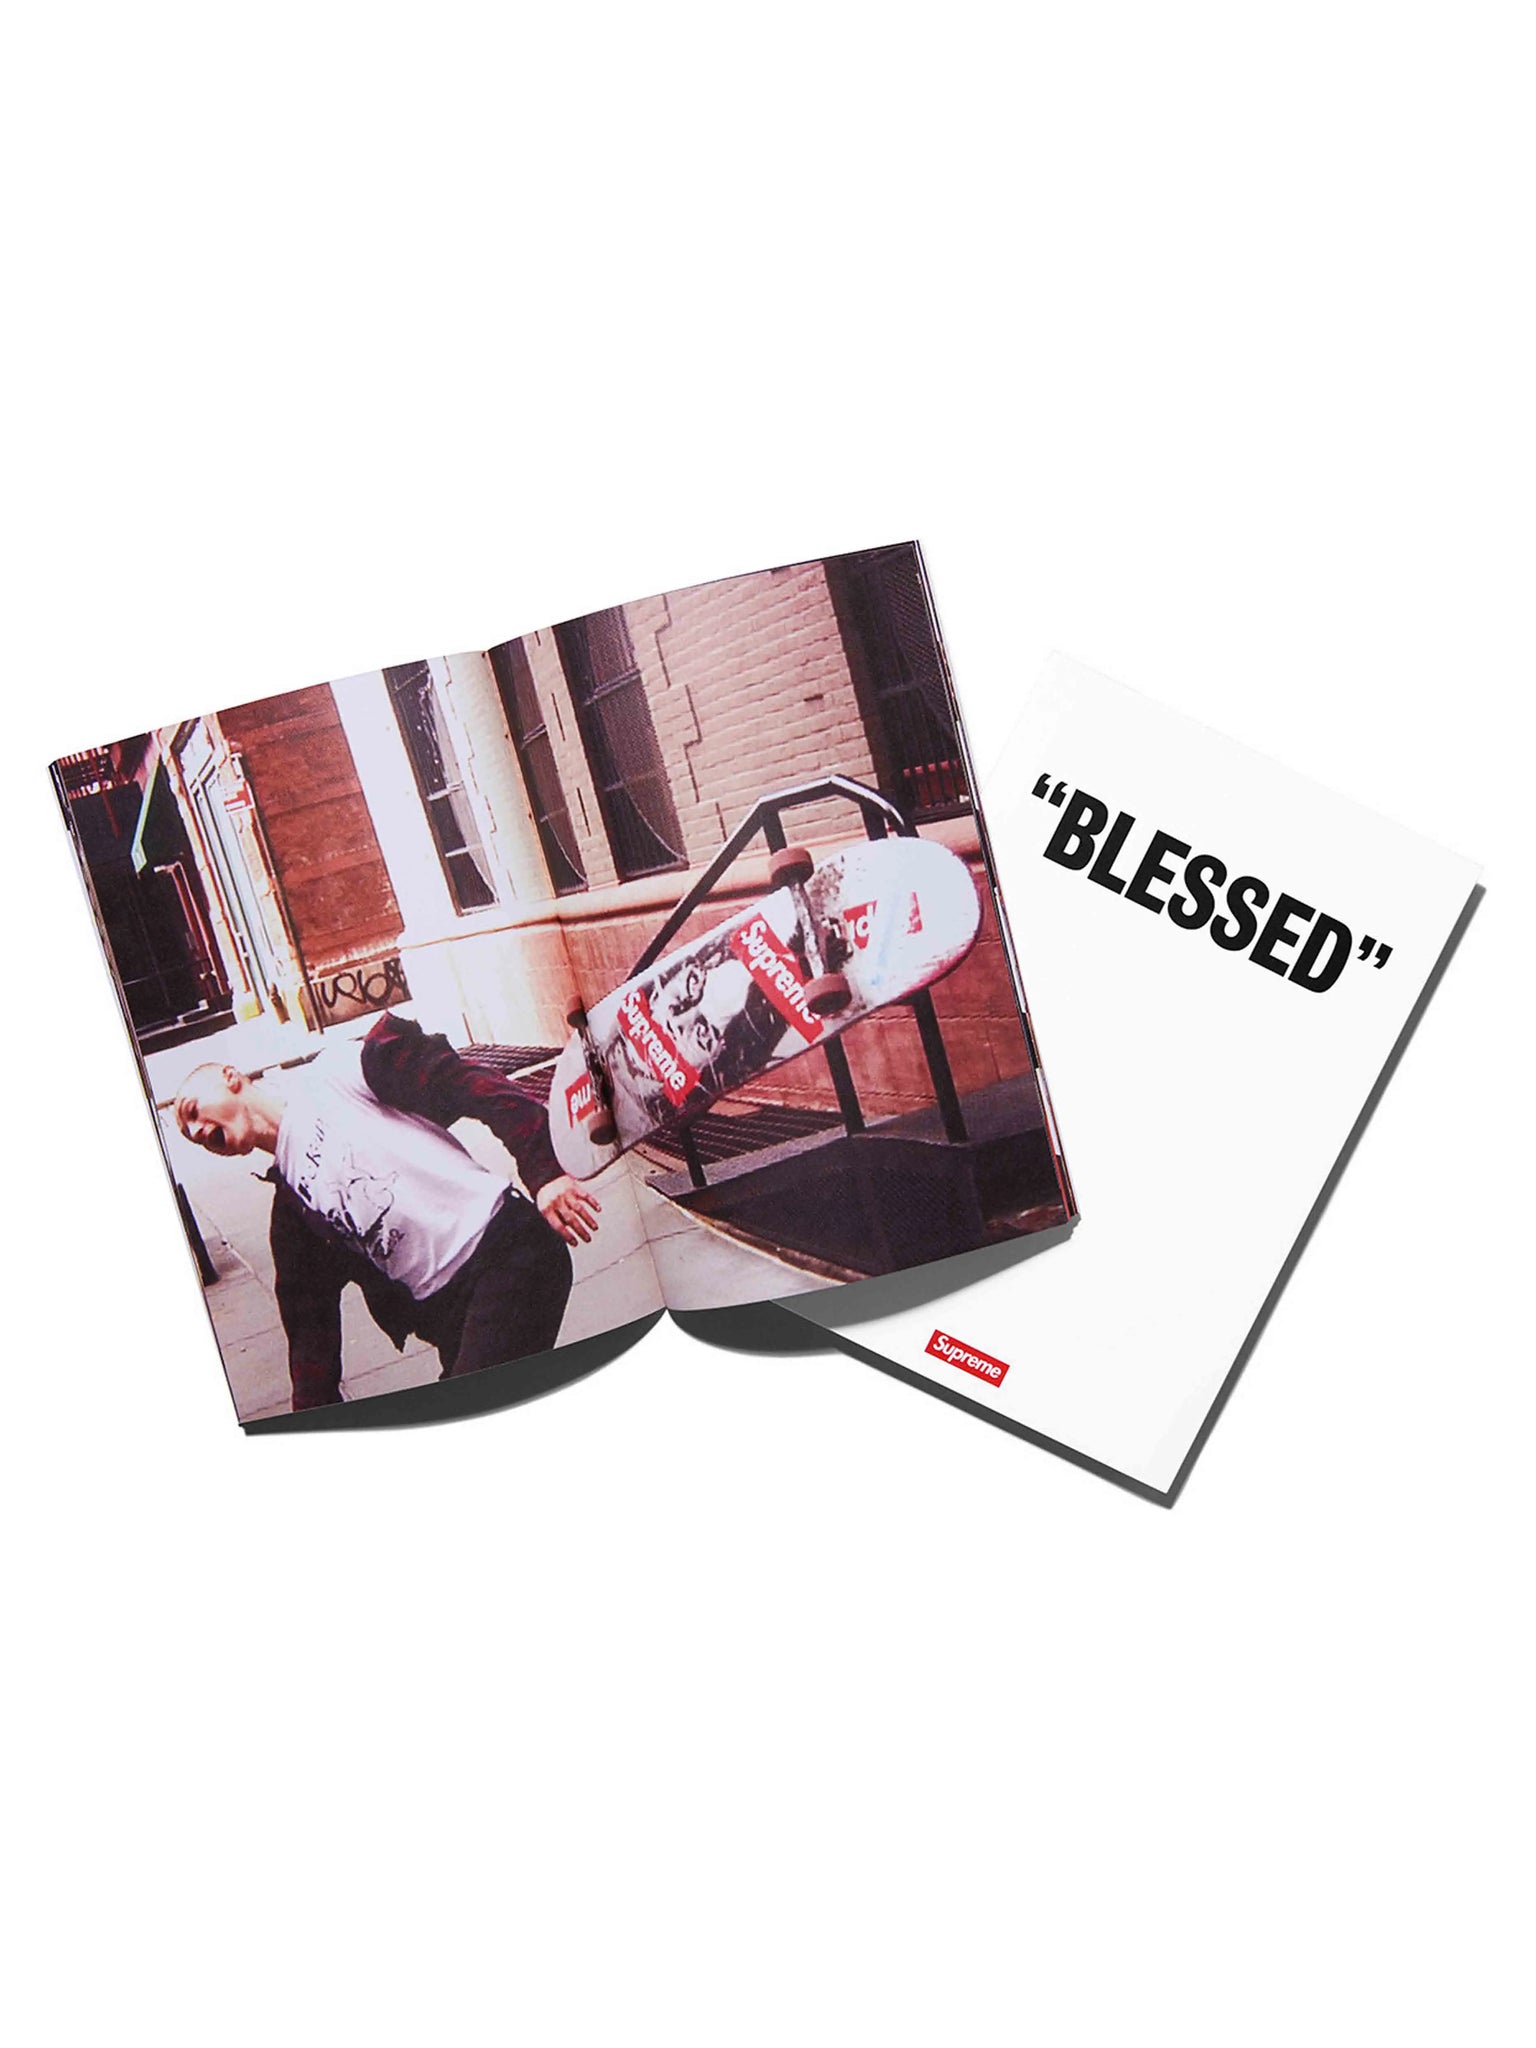 Supreme "Blessed" DVD and Photo Book [FW18] Prior